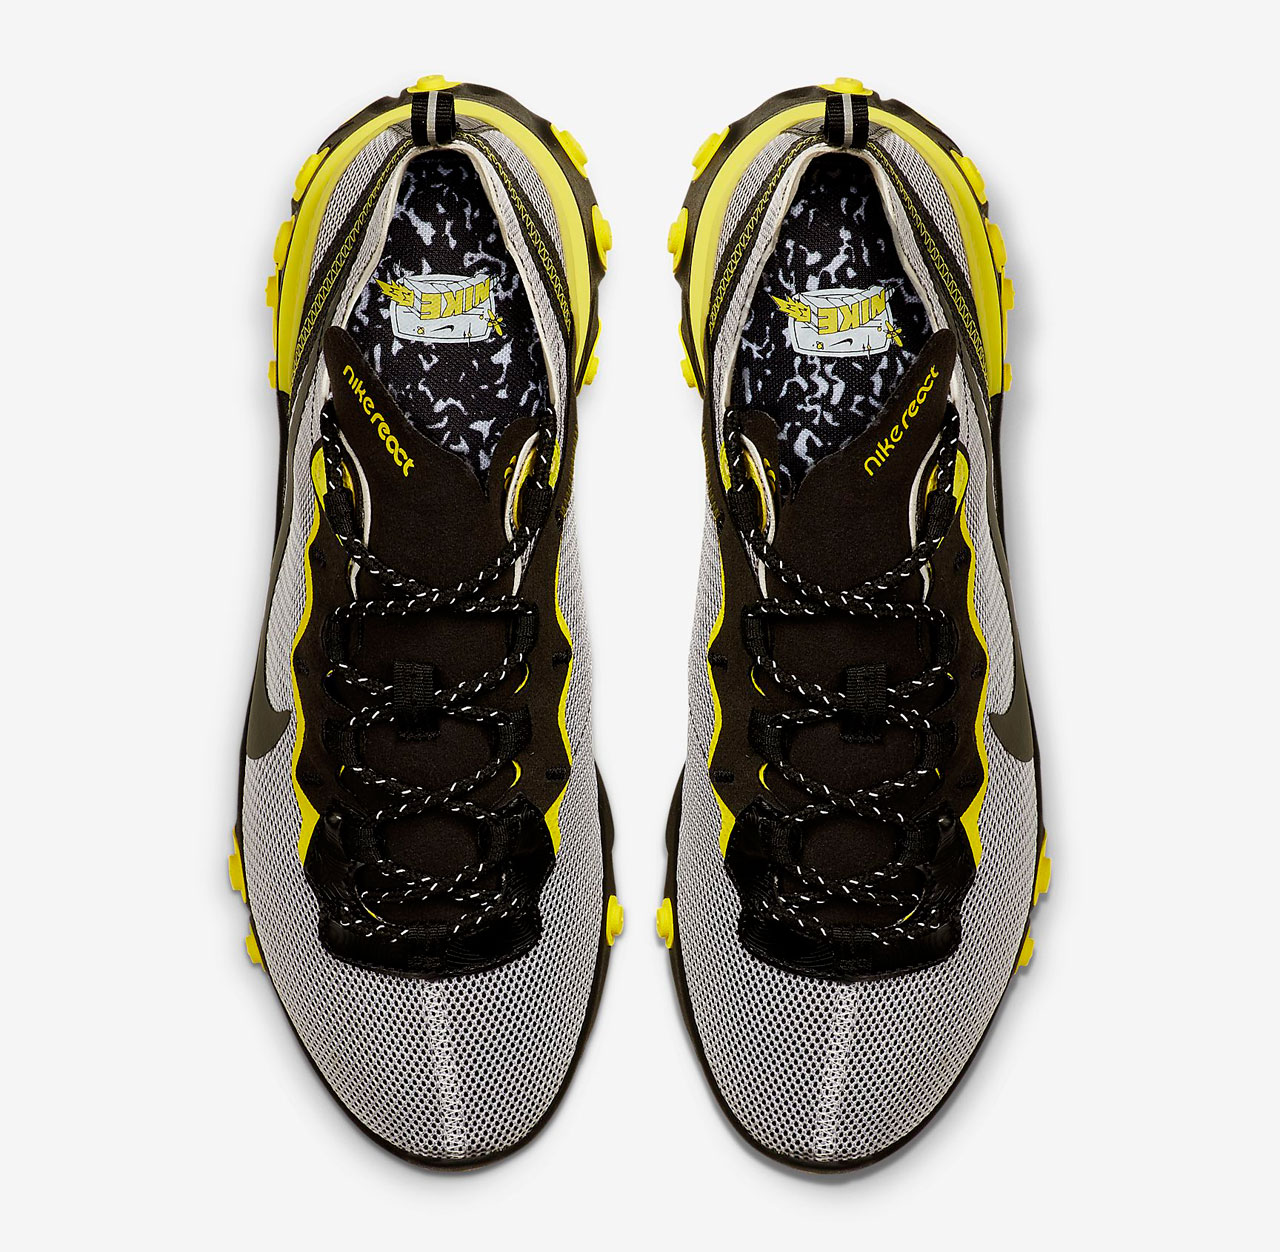 nike-react-element-55-dynamic-yellow-top-of-the-class-where-to-buy-2